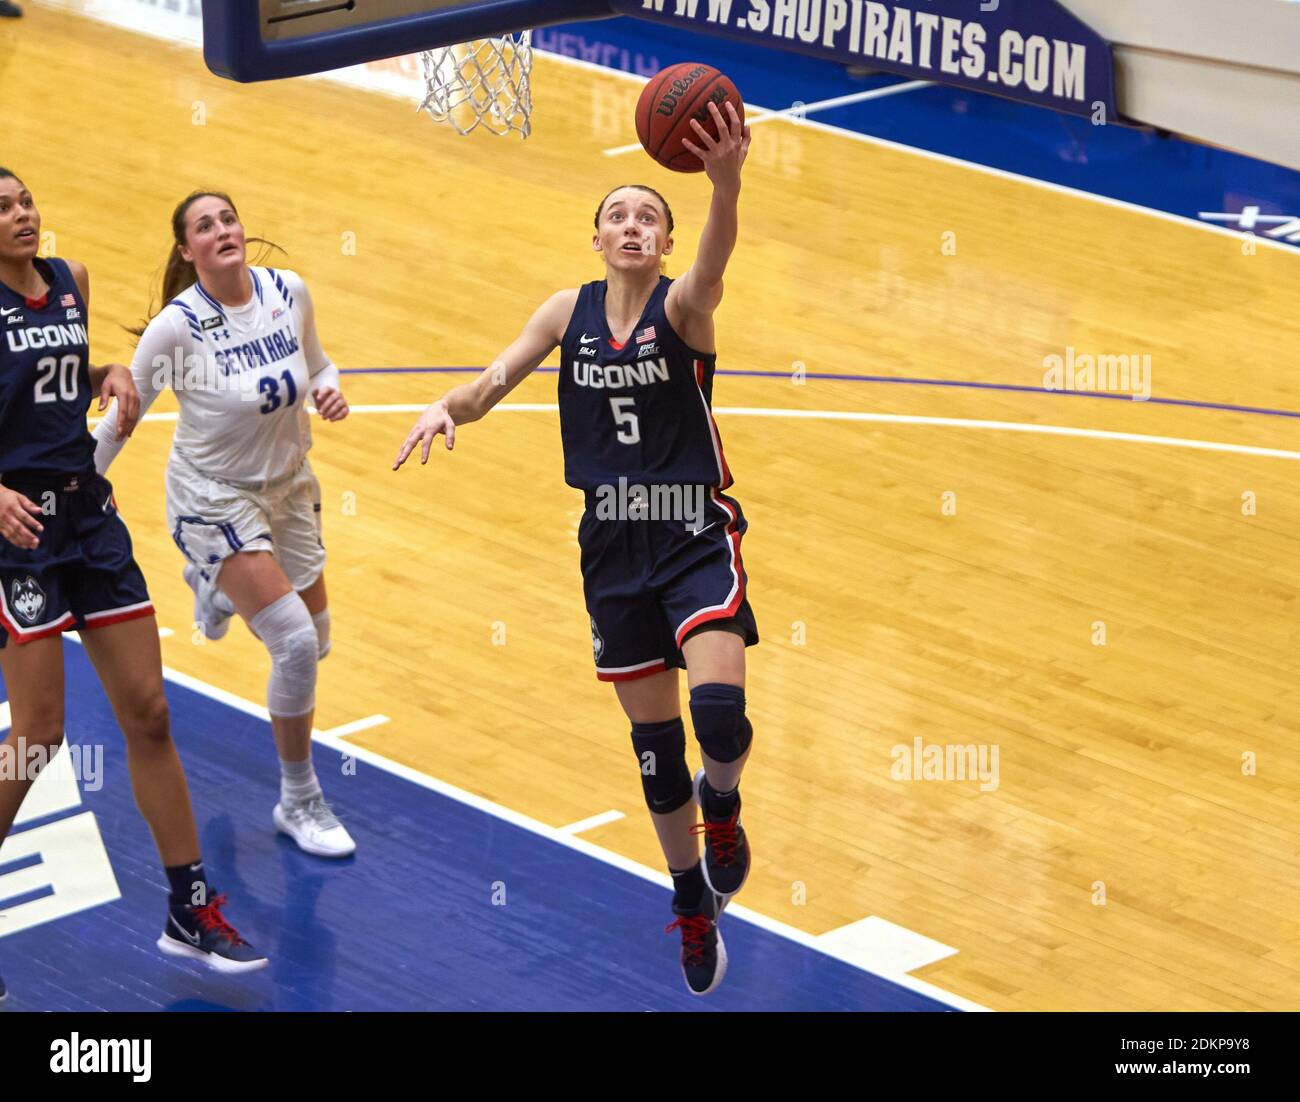 South Orange, New Jersey, USA. 16th Dec, 2020. UConn Huskies guard Paige Bueckers (5) scores a basket in the second half at Walsh Gymnasium in South Orange, New Jersey. UConn defeated Seton Hall 92-65. Duncan Williams/CSM/Alamy Live News Stock Photo